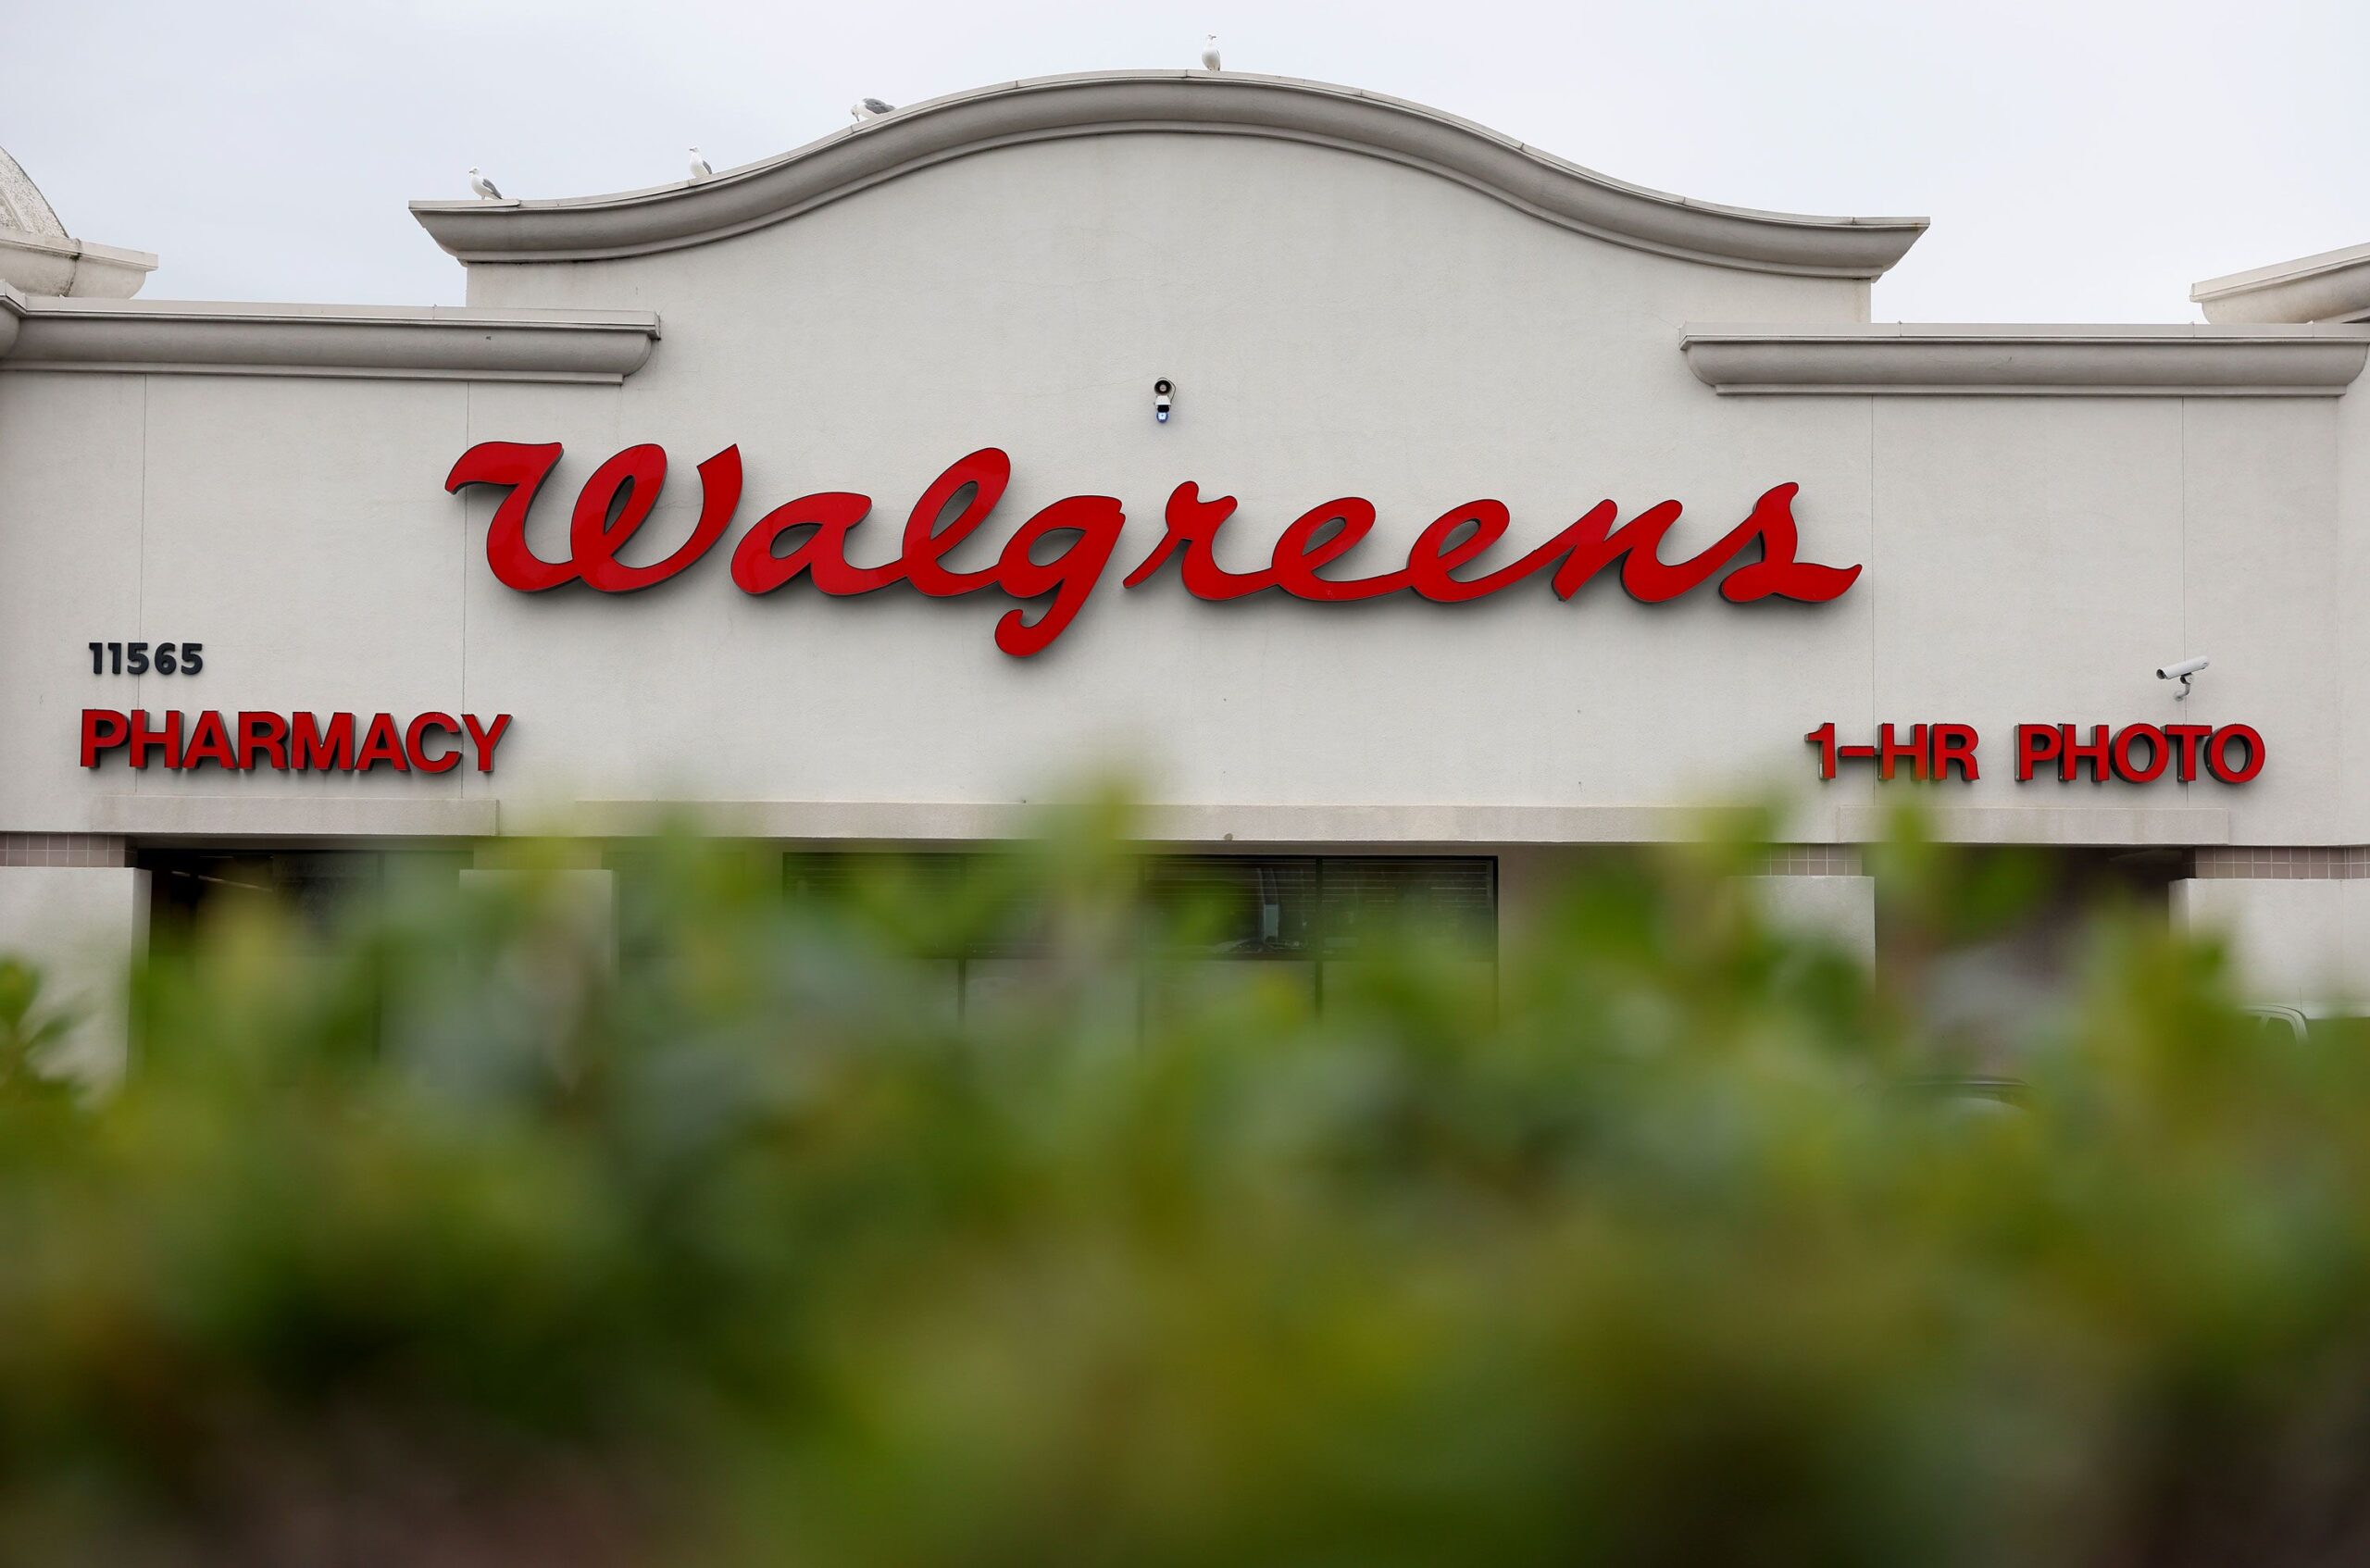 Some pharmacy workers at Walgreens, one of the nation’s largest drugstore chains, say they are pl...